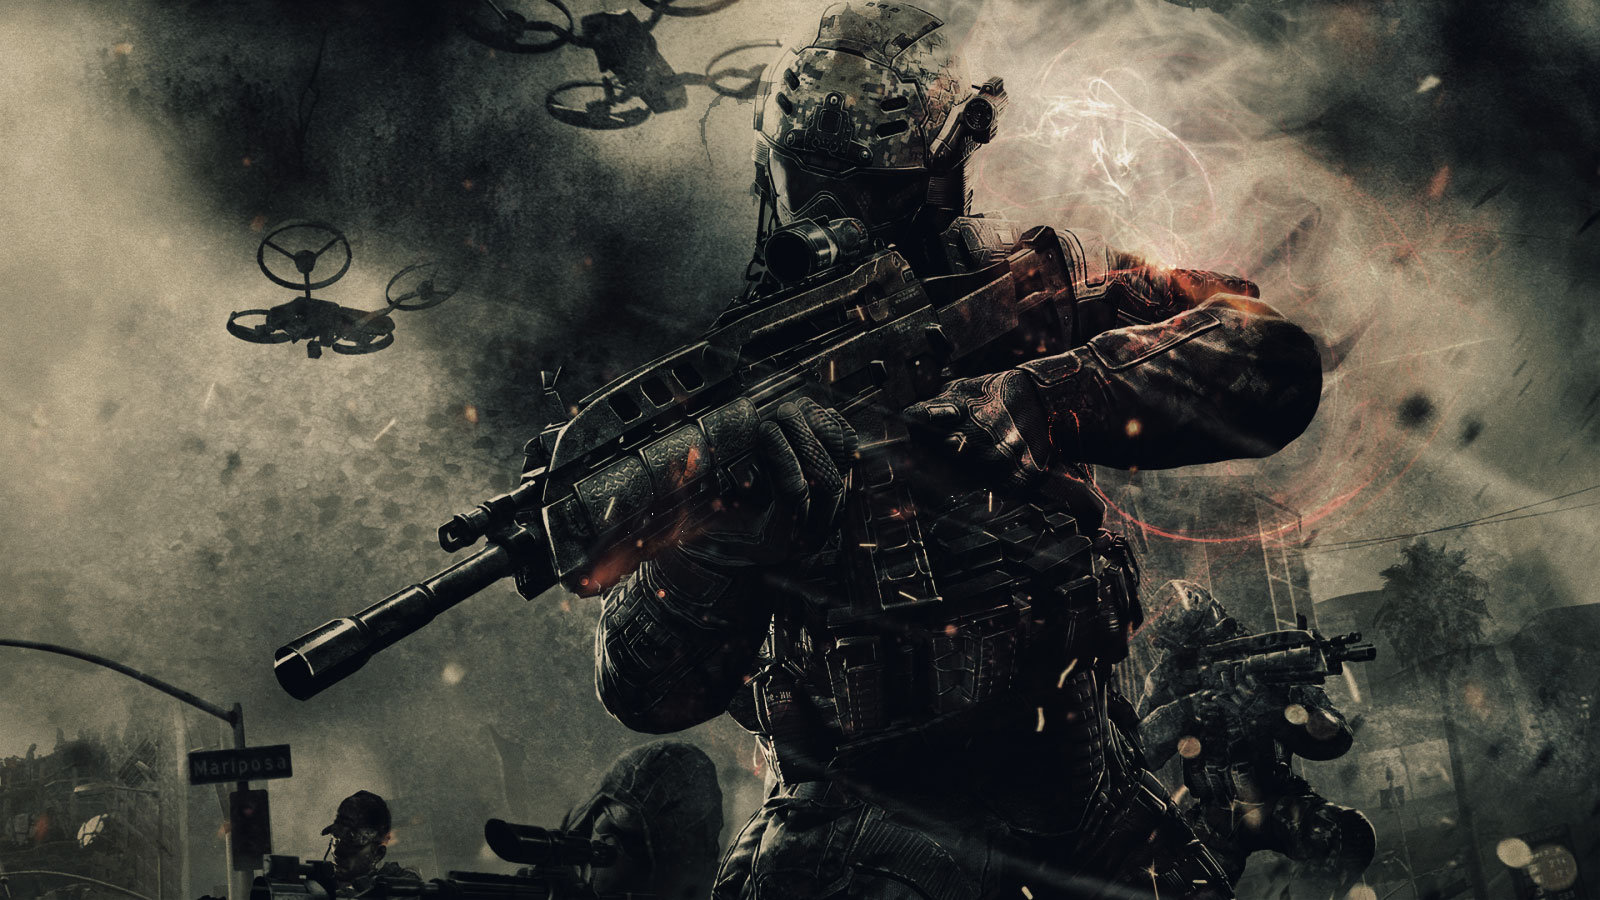 CALL OF DUTY WALLPAPER 5742 Picture Daily Update